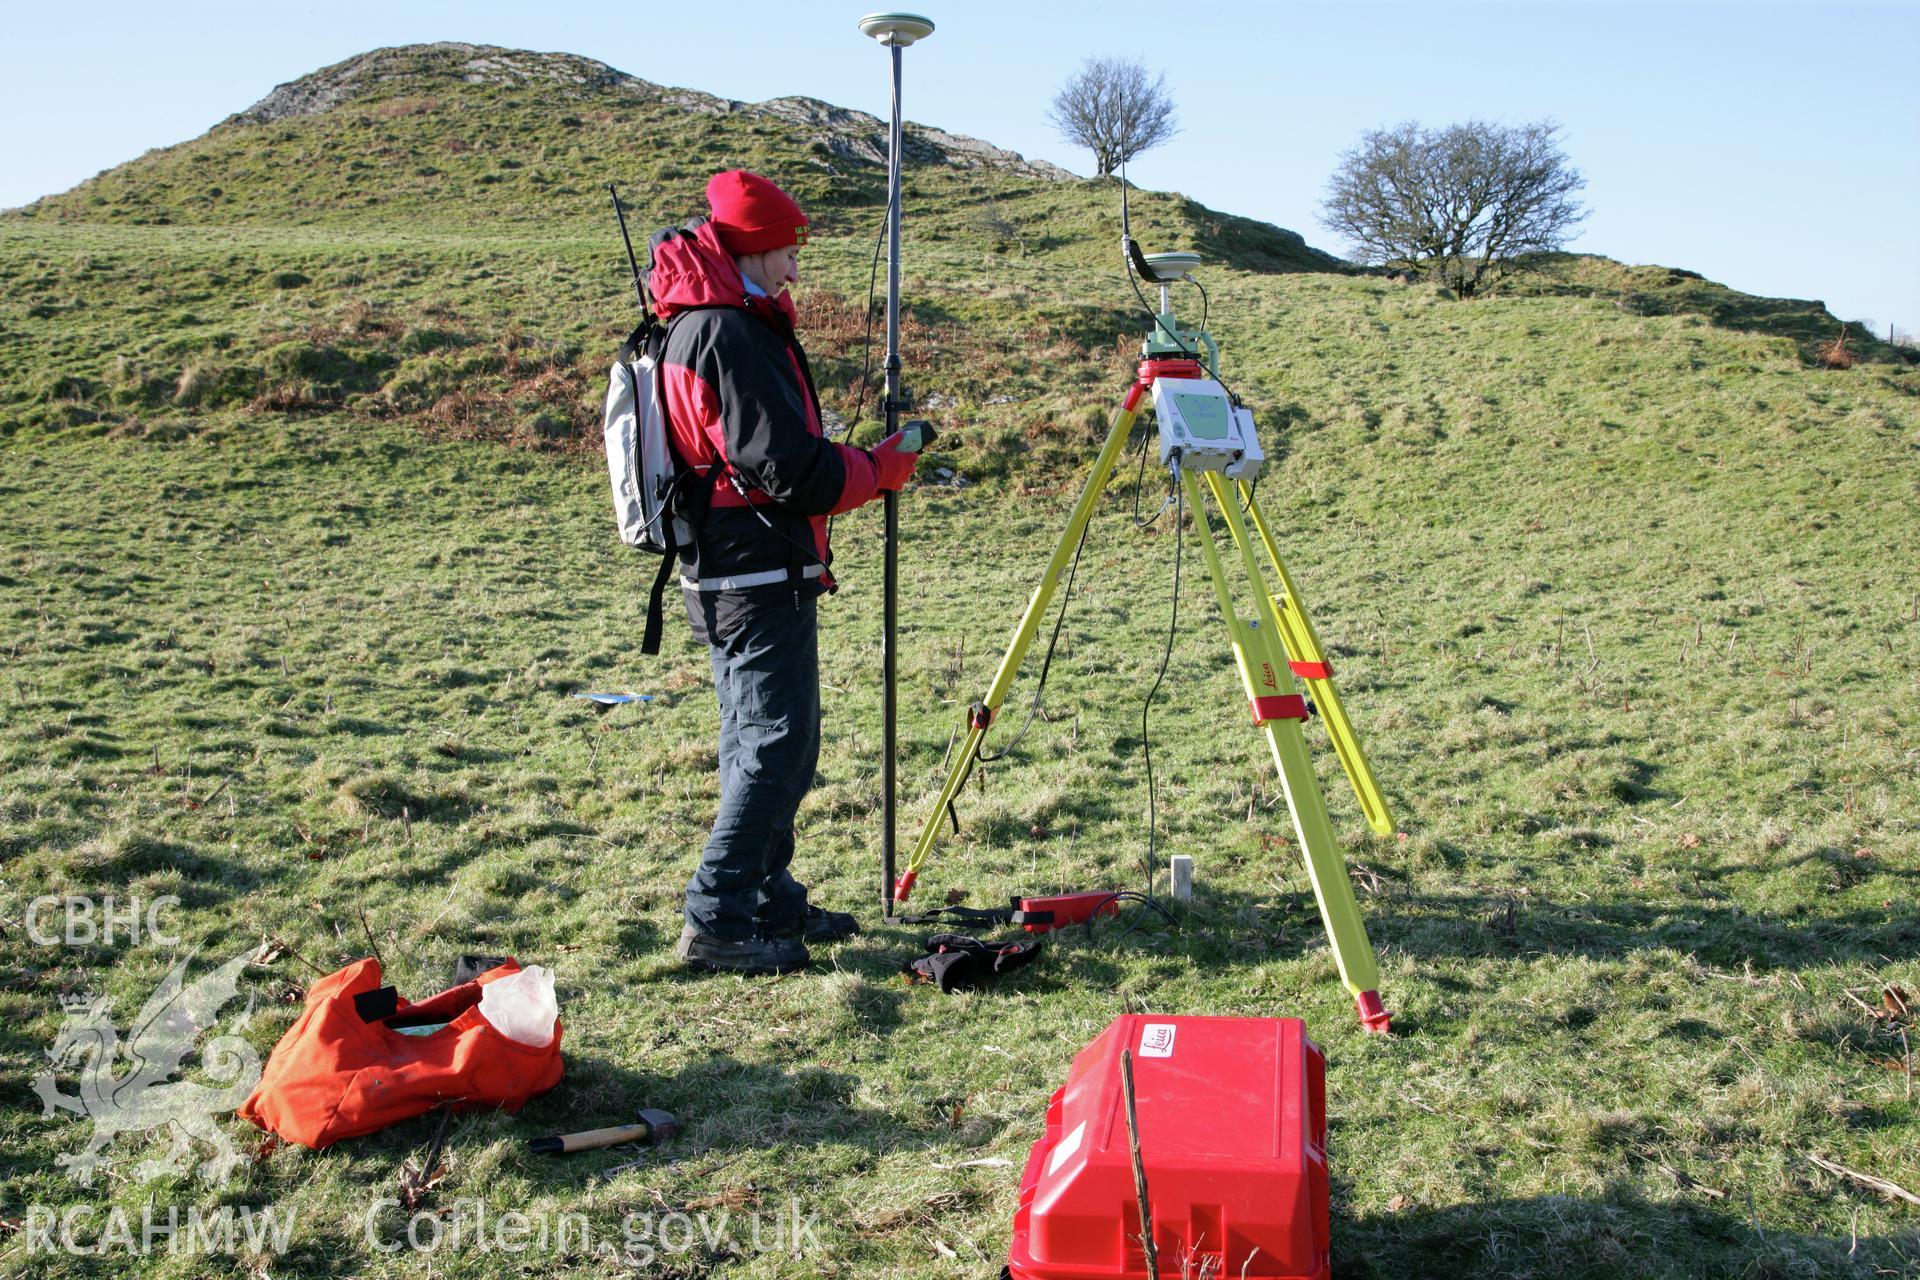 Castell Grogwynion hillfort, Royal Commission survey 2012, Louise Barker surveying in lower interior